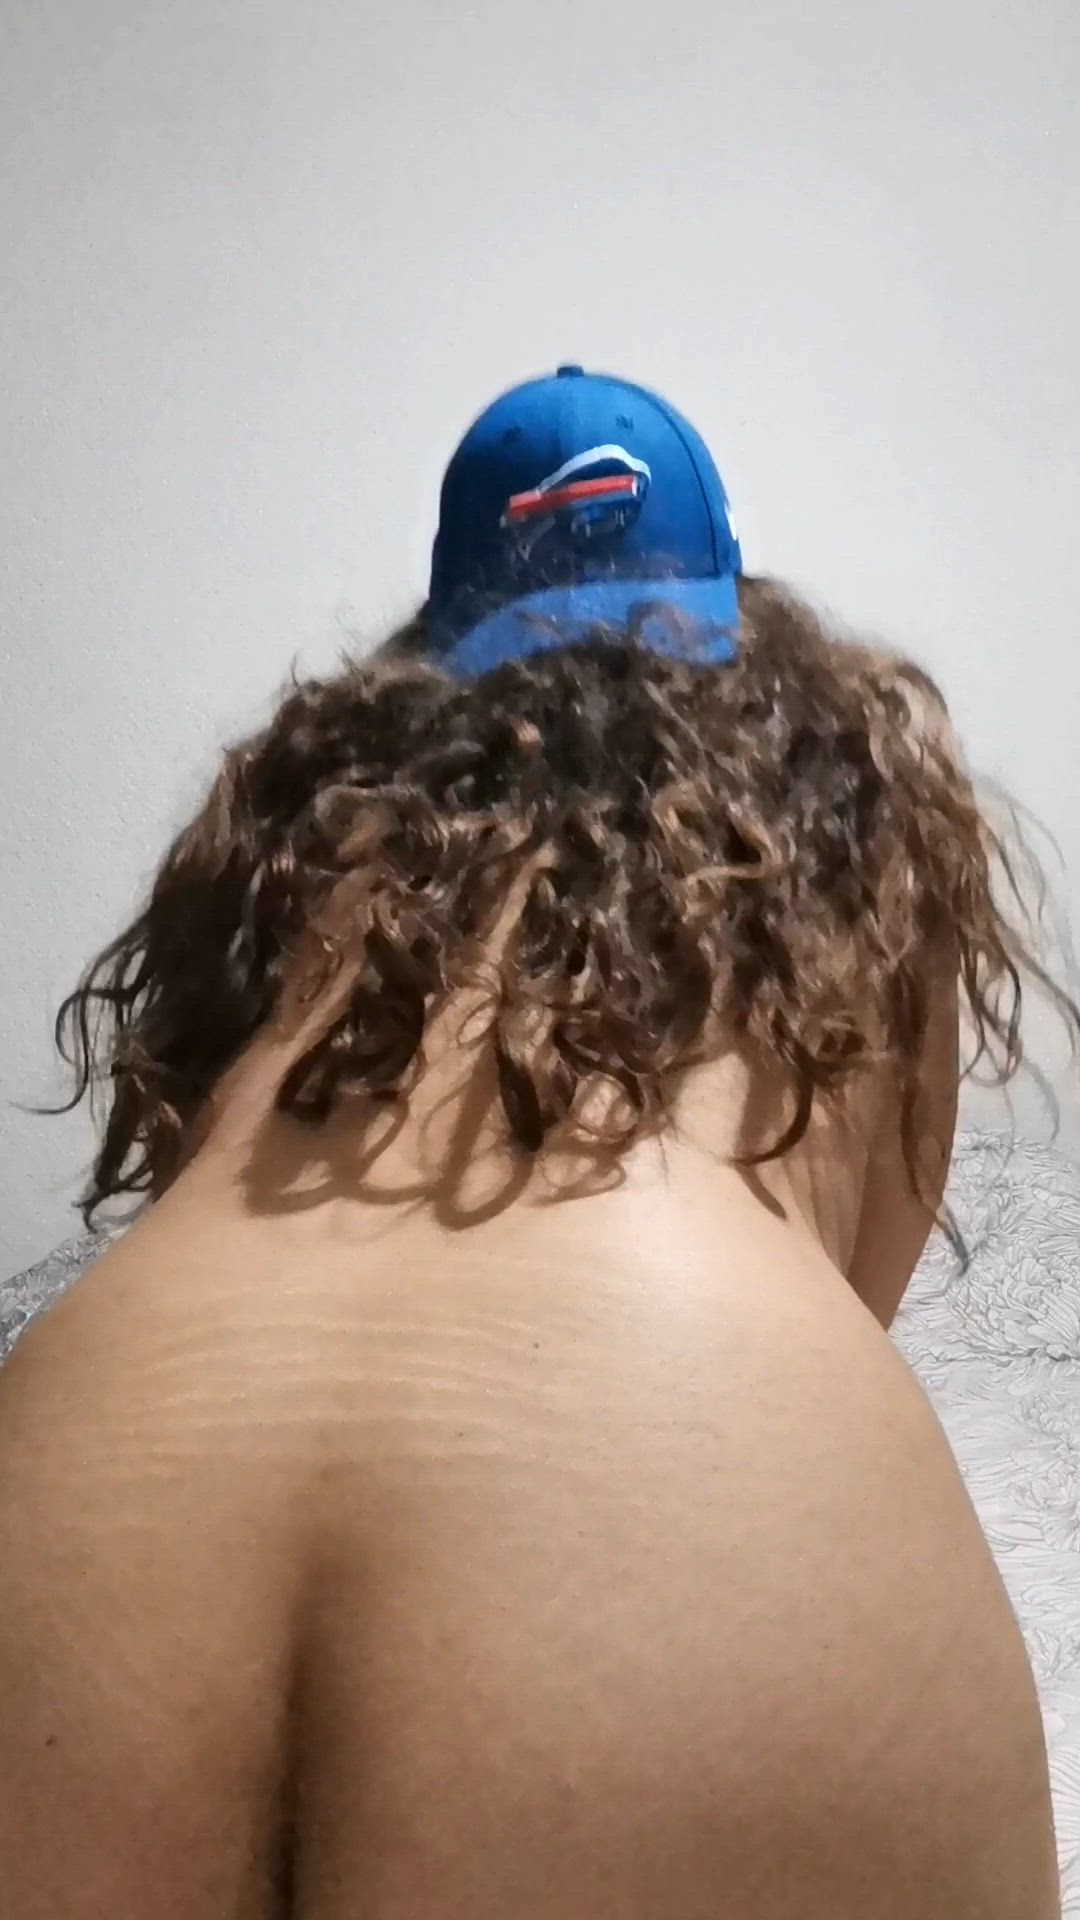 Ass porn video with onlyfans model Gisela.s <strong>@gisela.s</strong>